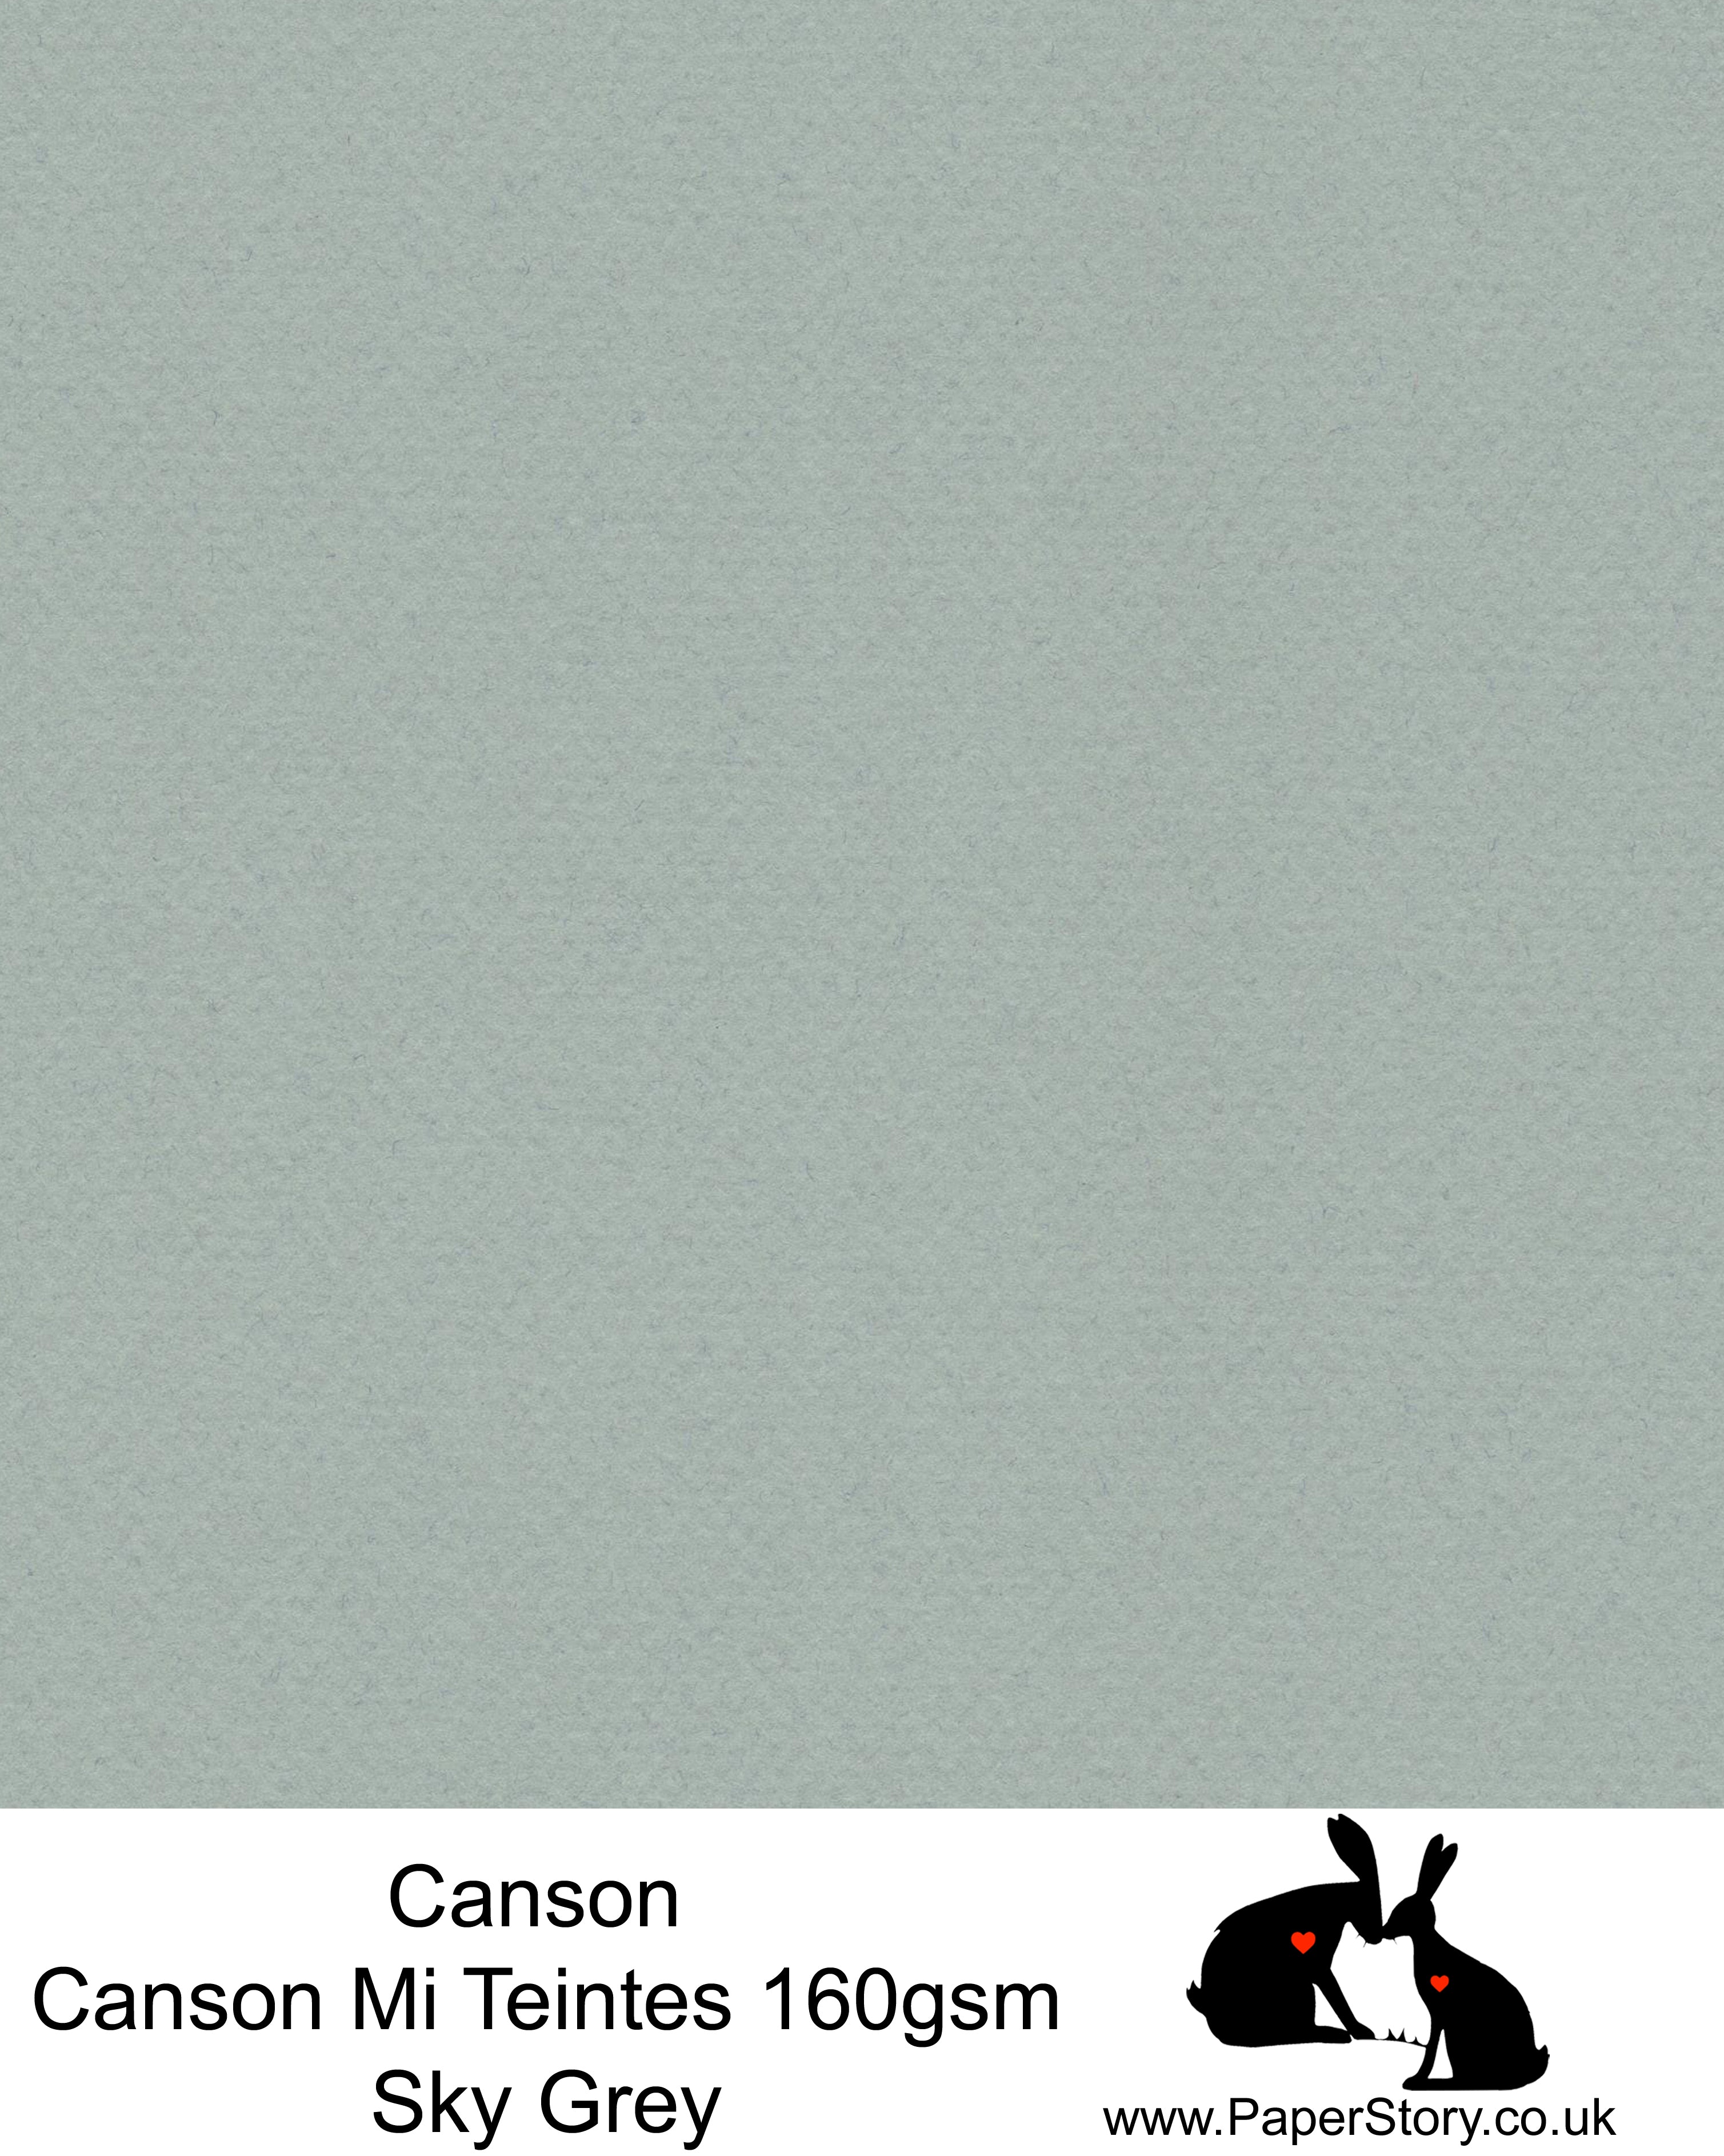 Canson Mi Teintes acid free, sky grey, grey with a cool tint of blue, hammered texture honeycomb surface paper 160 gsm. This is a popular and classic paper for all artists especially well respected for Pastel  and Papercutting made famous by Paper Panda. This paper has a honeycombed finish one side and fine grain the other. An authentic art paper, acid free with a  very high 50% cotton content. Canson Mi-Teintes complies with the ISO 9706 standard on permanence, a guarantee of excellent conservation  